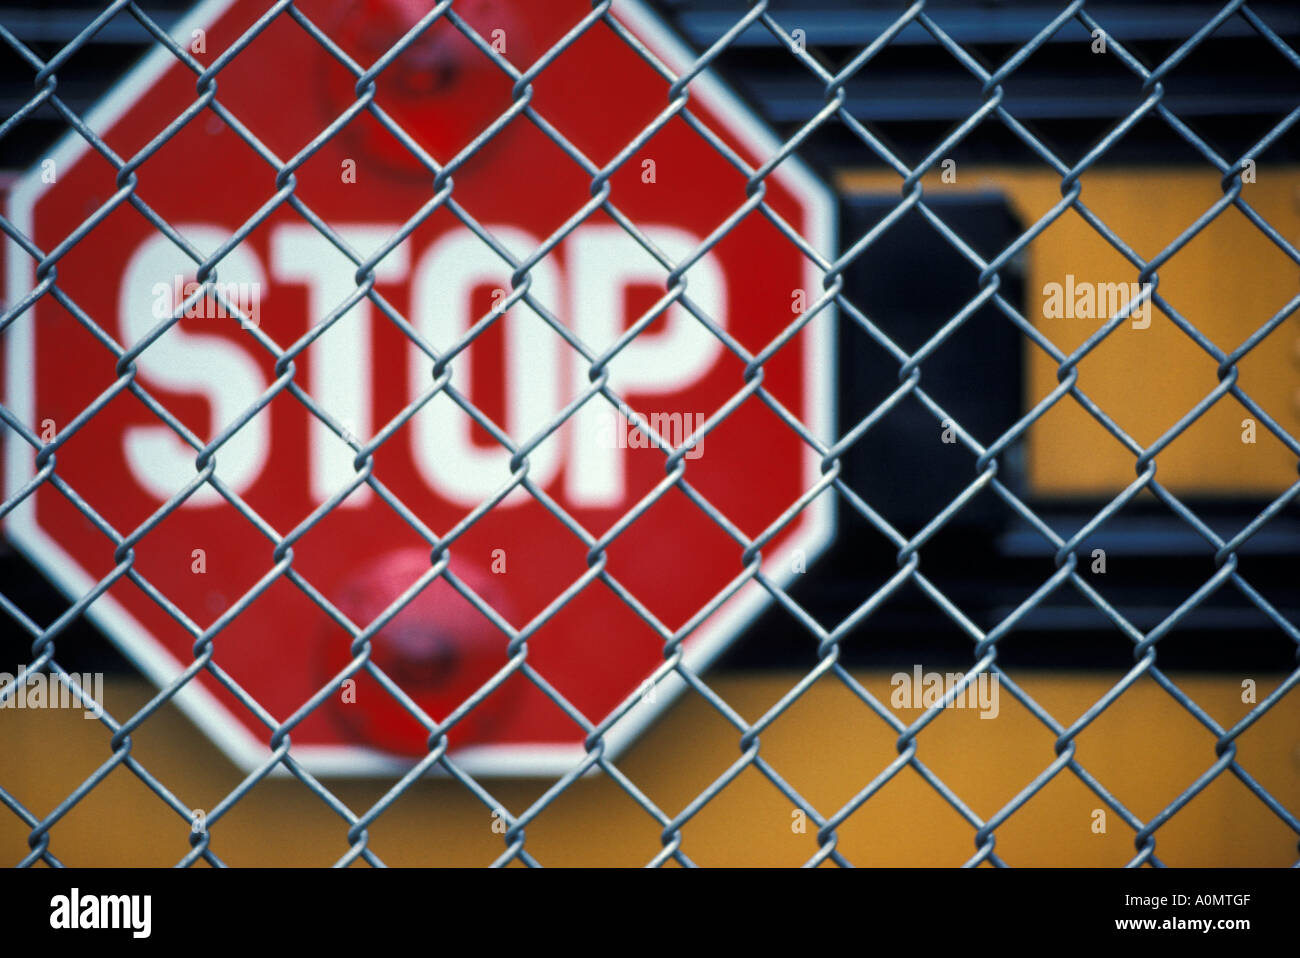 yellow school bus red stop sign chain link fence Stock Photo